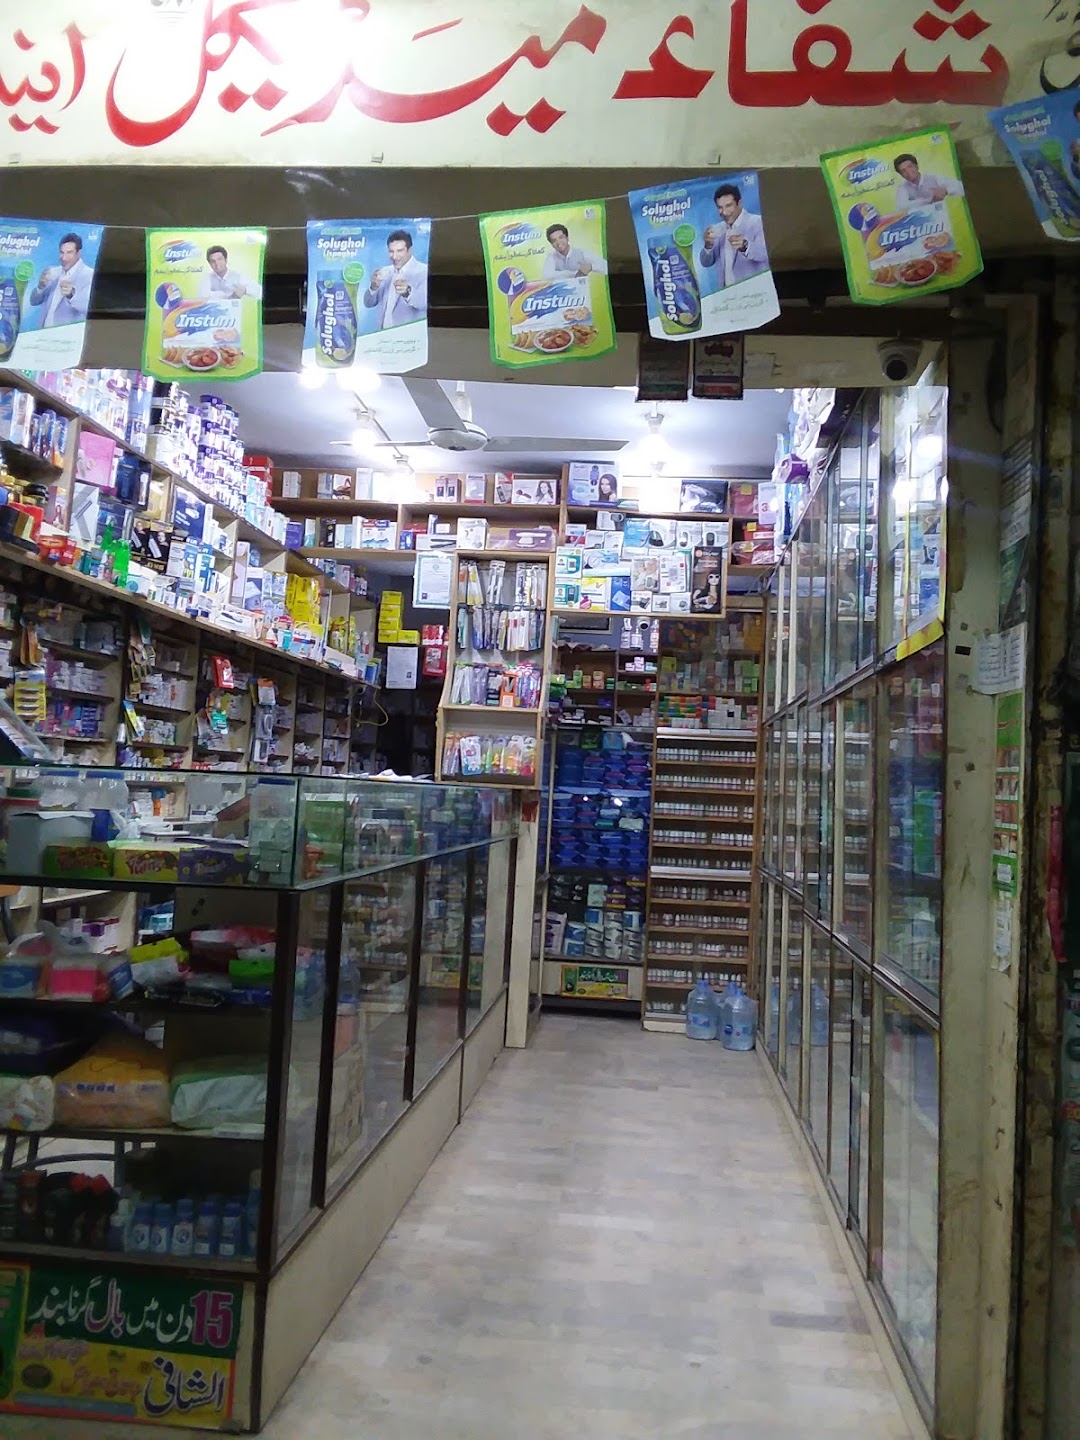 Shifa medical store and homeopathic